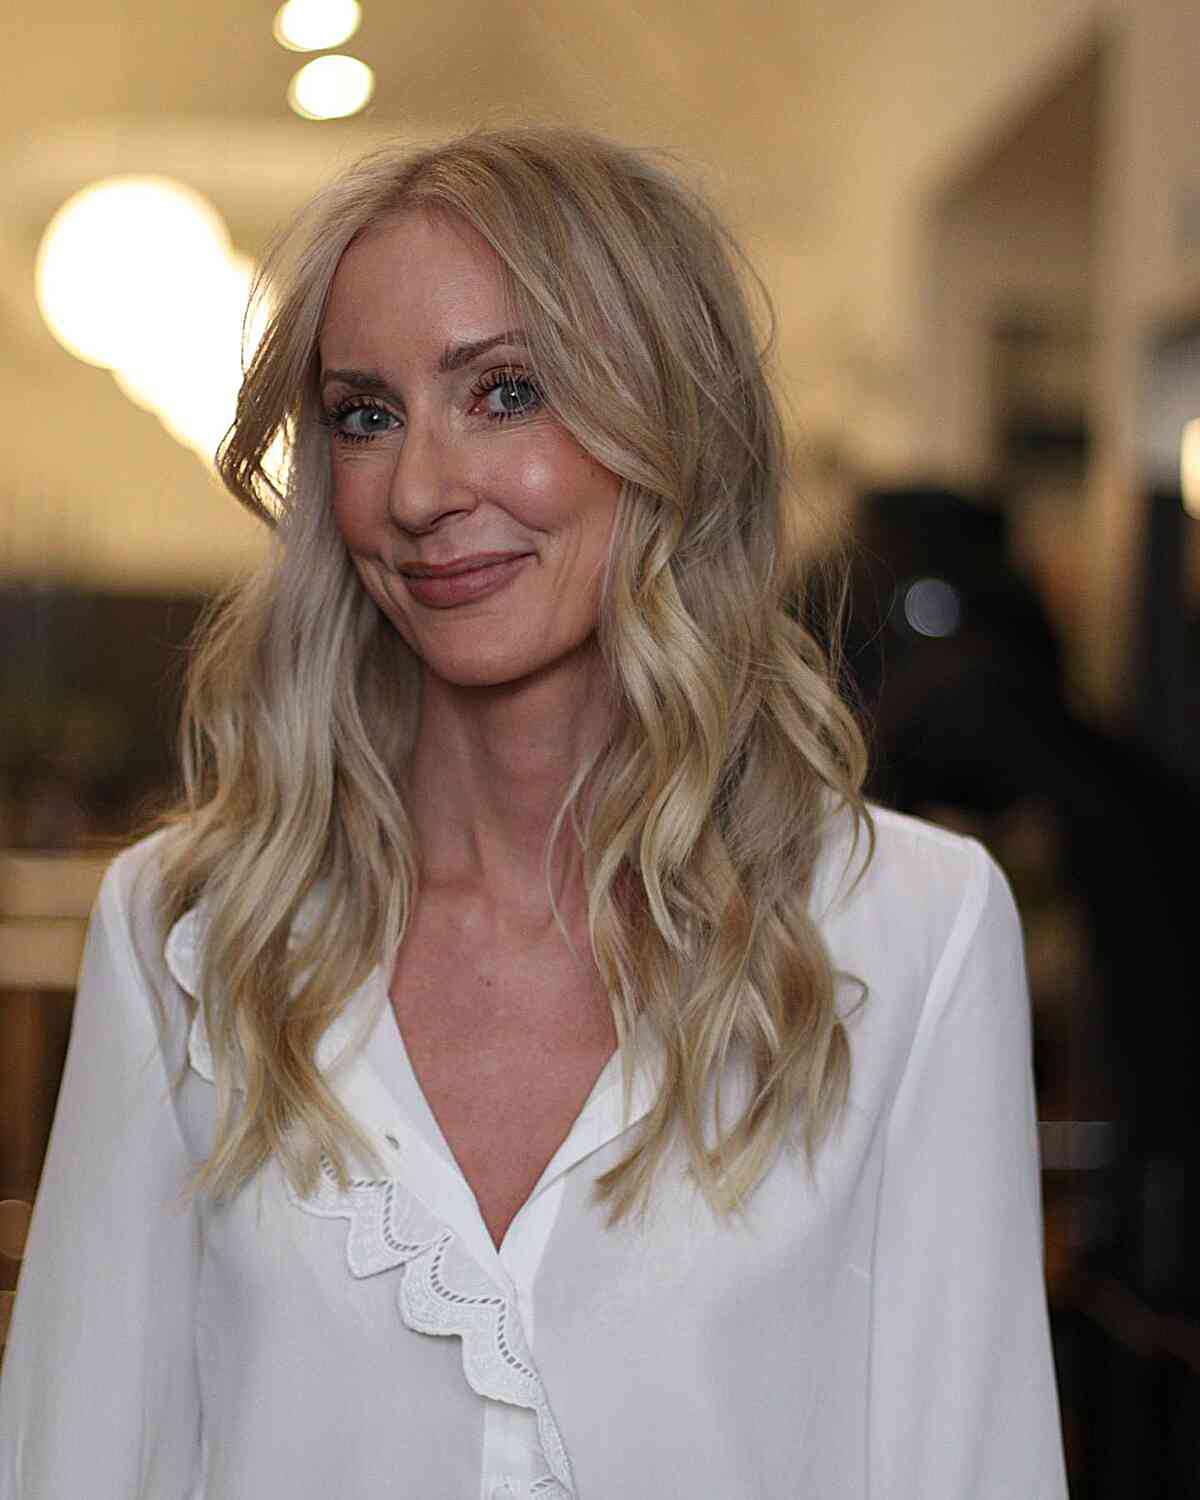 Long Layers and Long Curtain Fringe on Medium-Length Blonde Hair perfect for women in their 40s